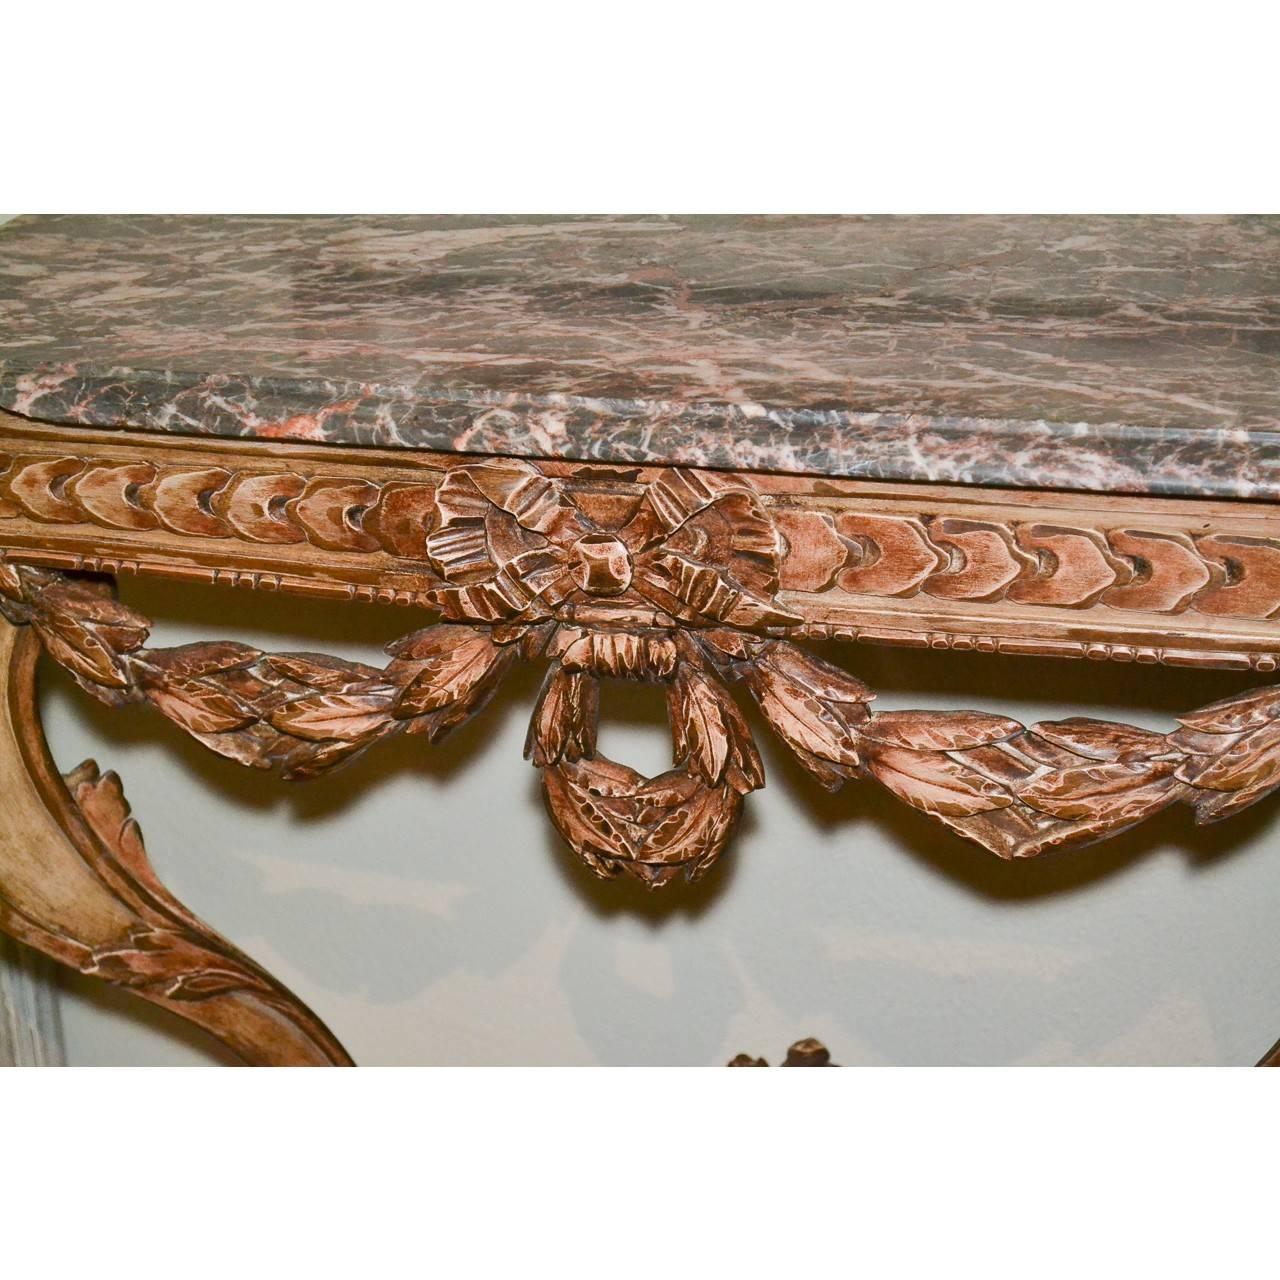 Add instant elegance to any interior with this gorgeous 19th century French lacquered wood console table with a particularly fine heavily veined marble top. The base all hand-carved with knotted bows and thistle swags. The graceful contoured legs